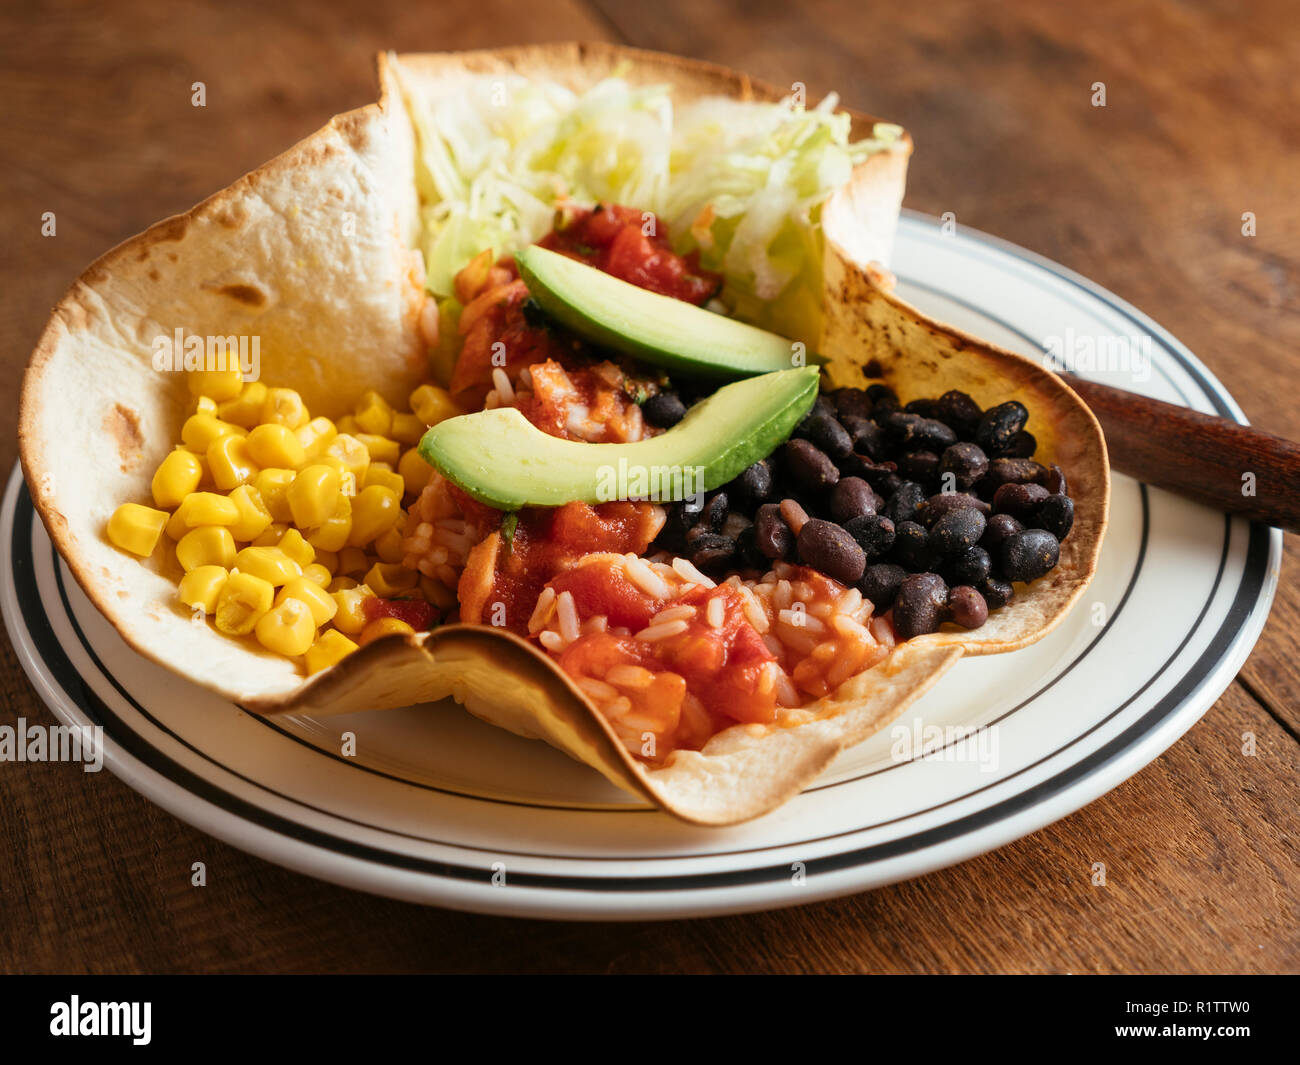 Mexican taco bowl with lettuce, corn, Mexican spicy, tomato rice, black beans, salsa and avocado on a flour tortilla. Stock Photo